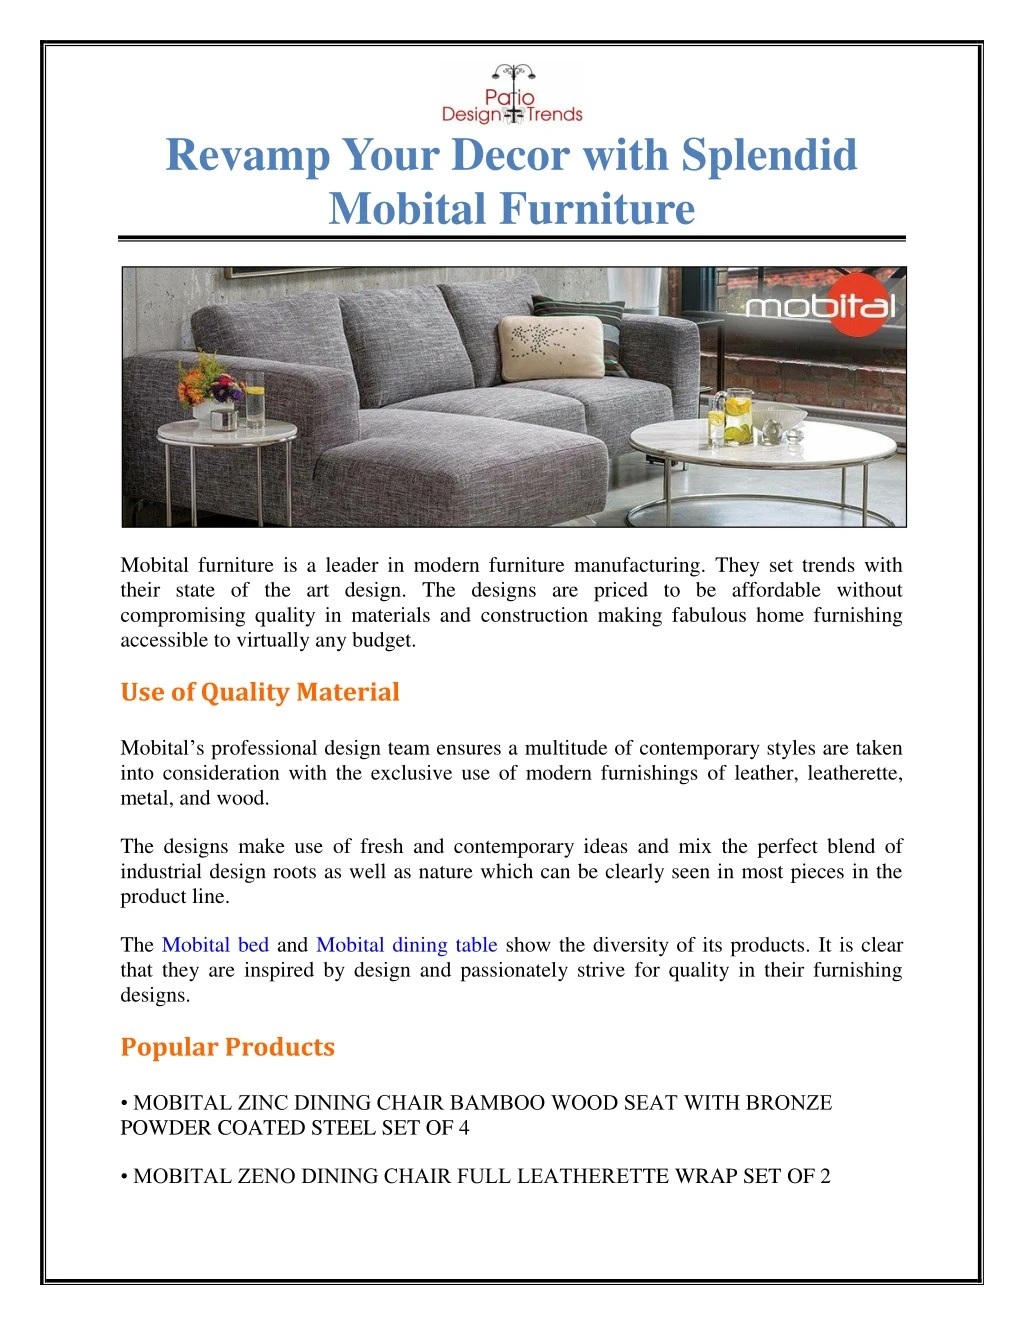 revamp your decor with splendid mobital furniture